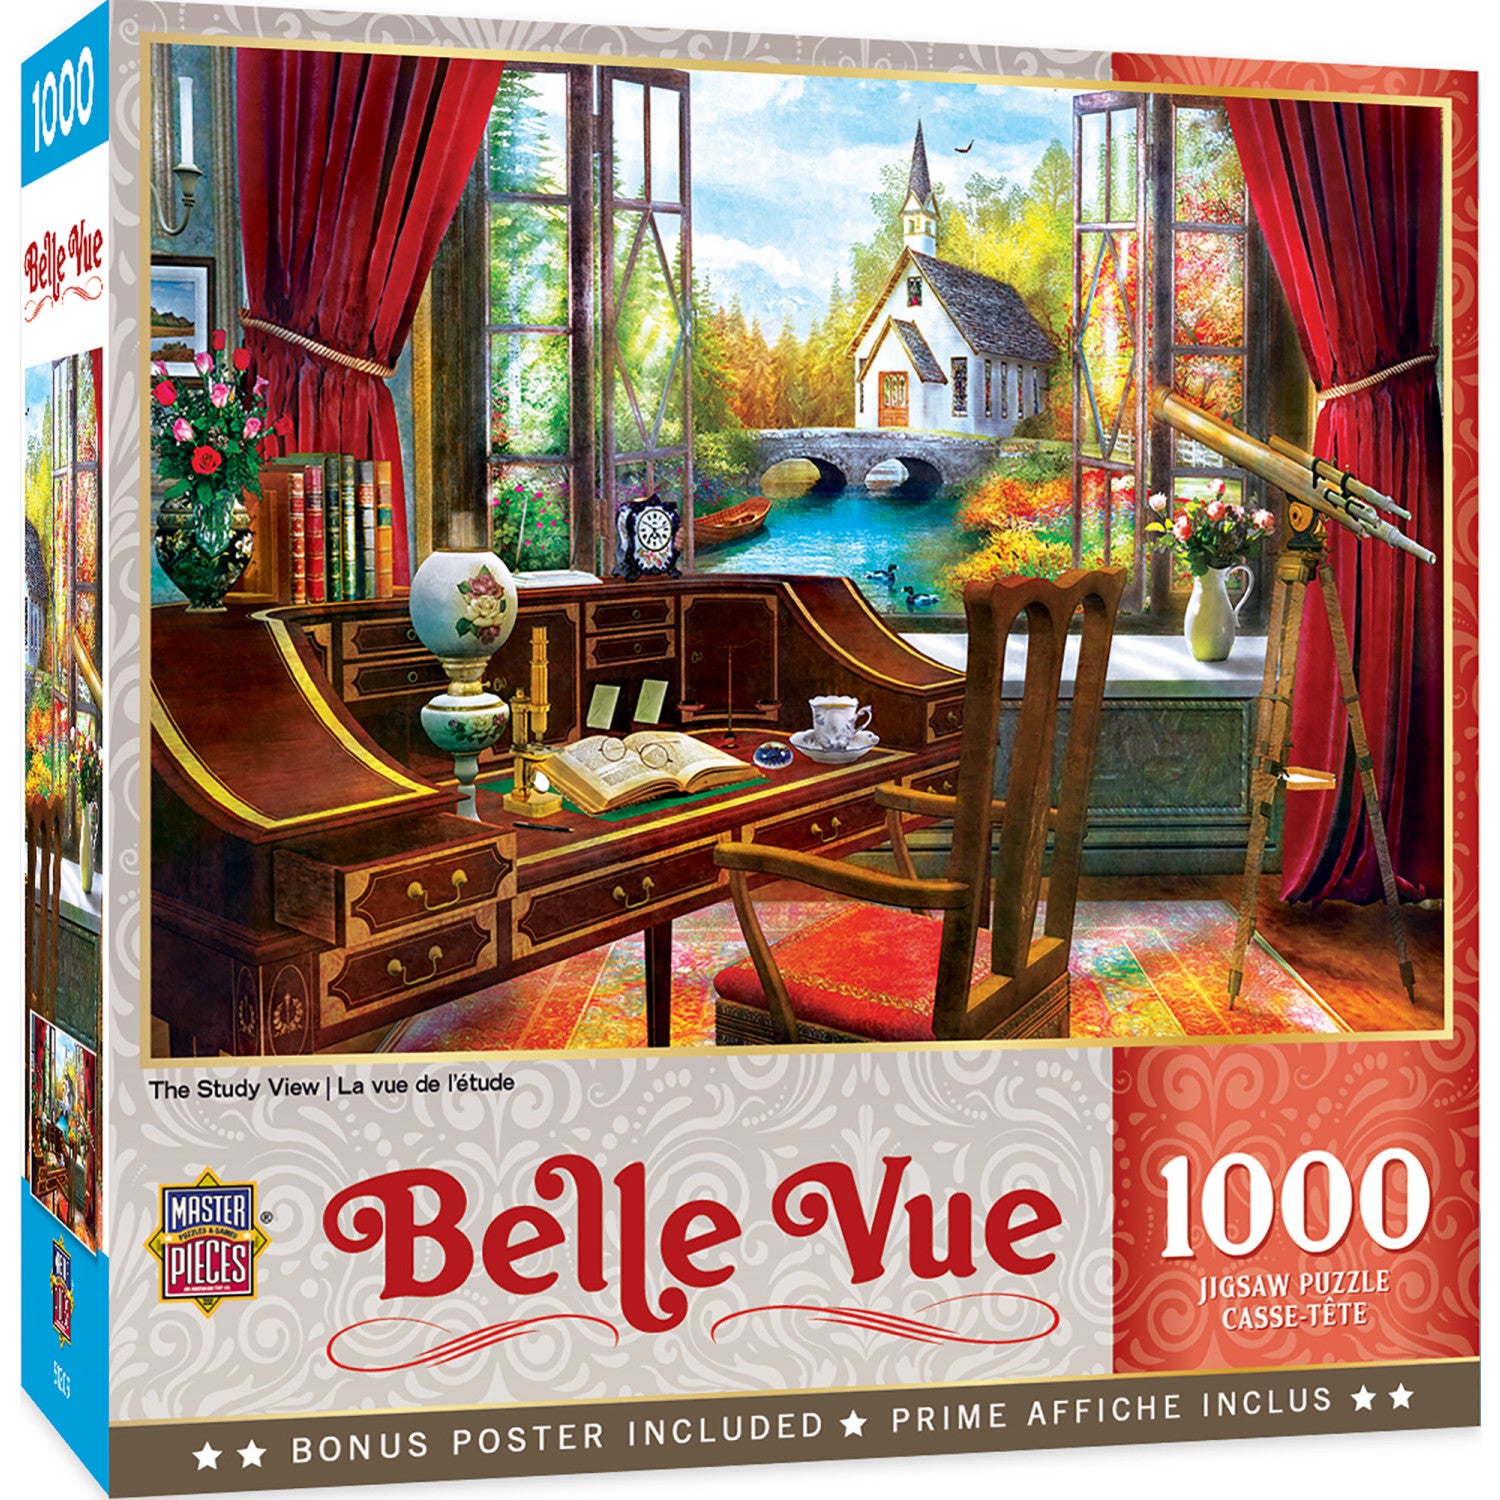 Belle Vue - The Study View 1000 Piece Jigsaw Puzzle